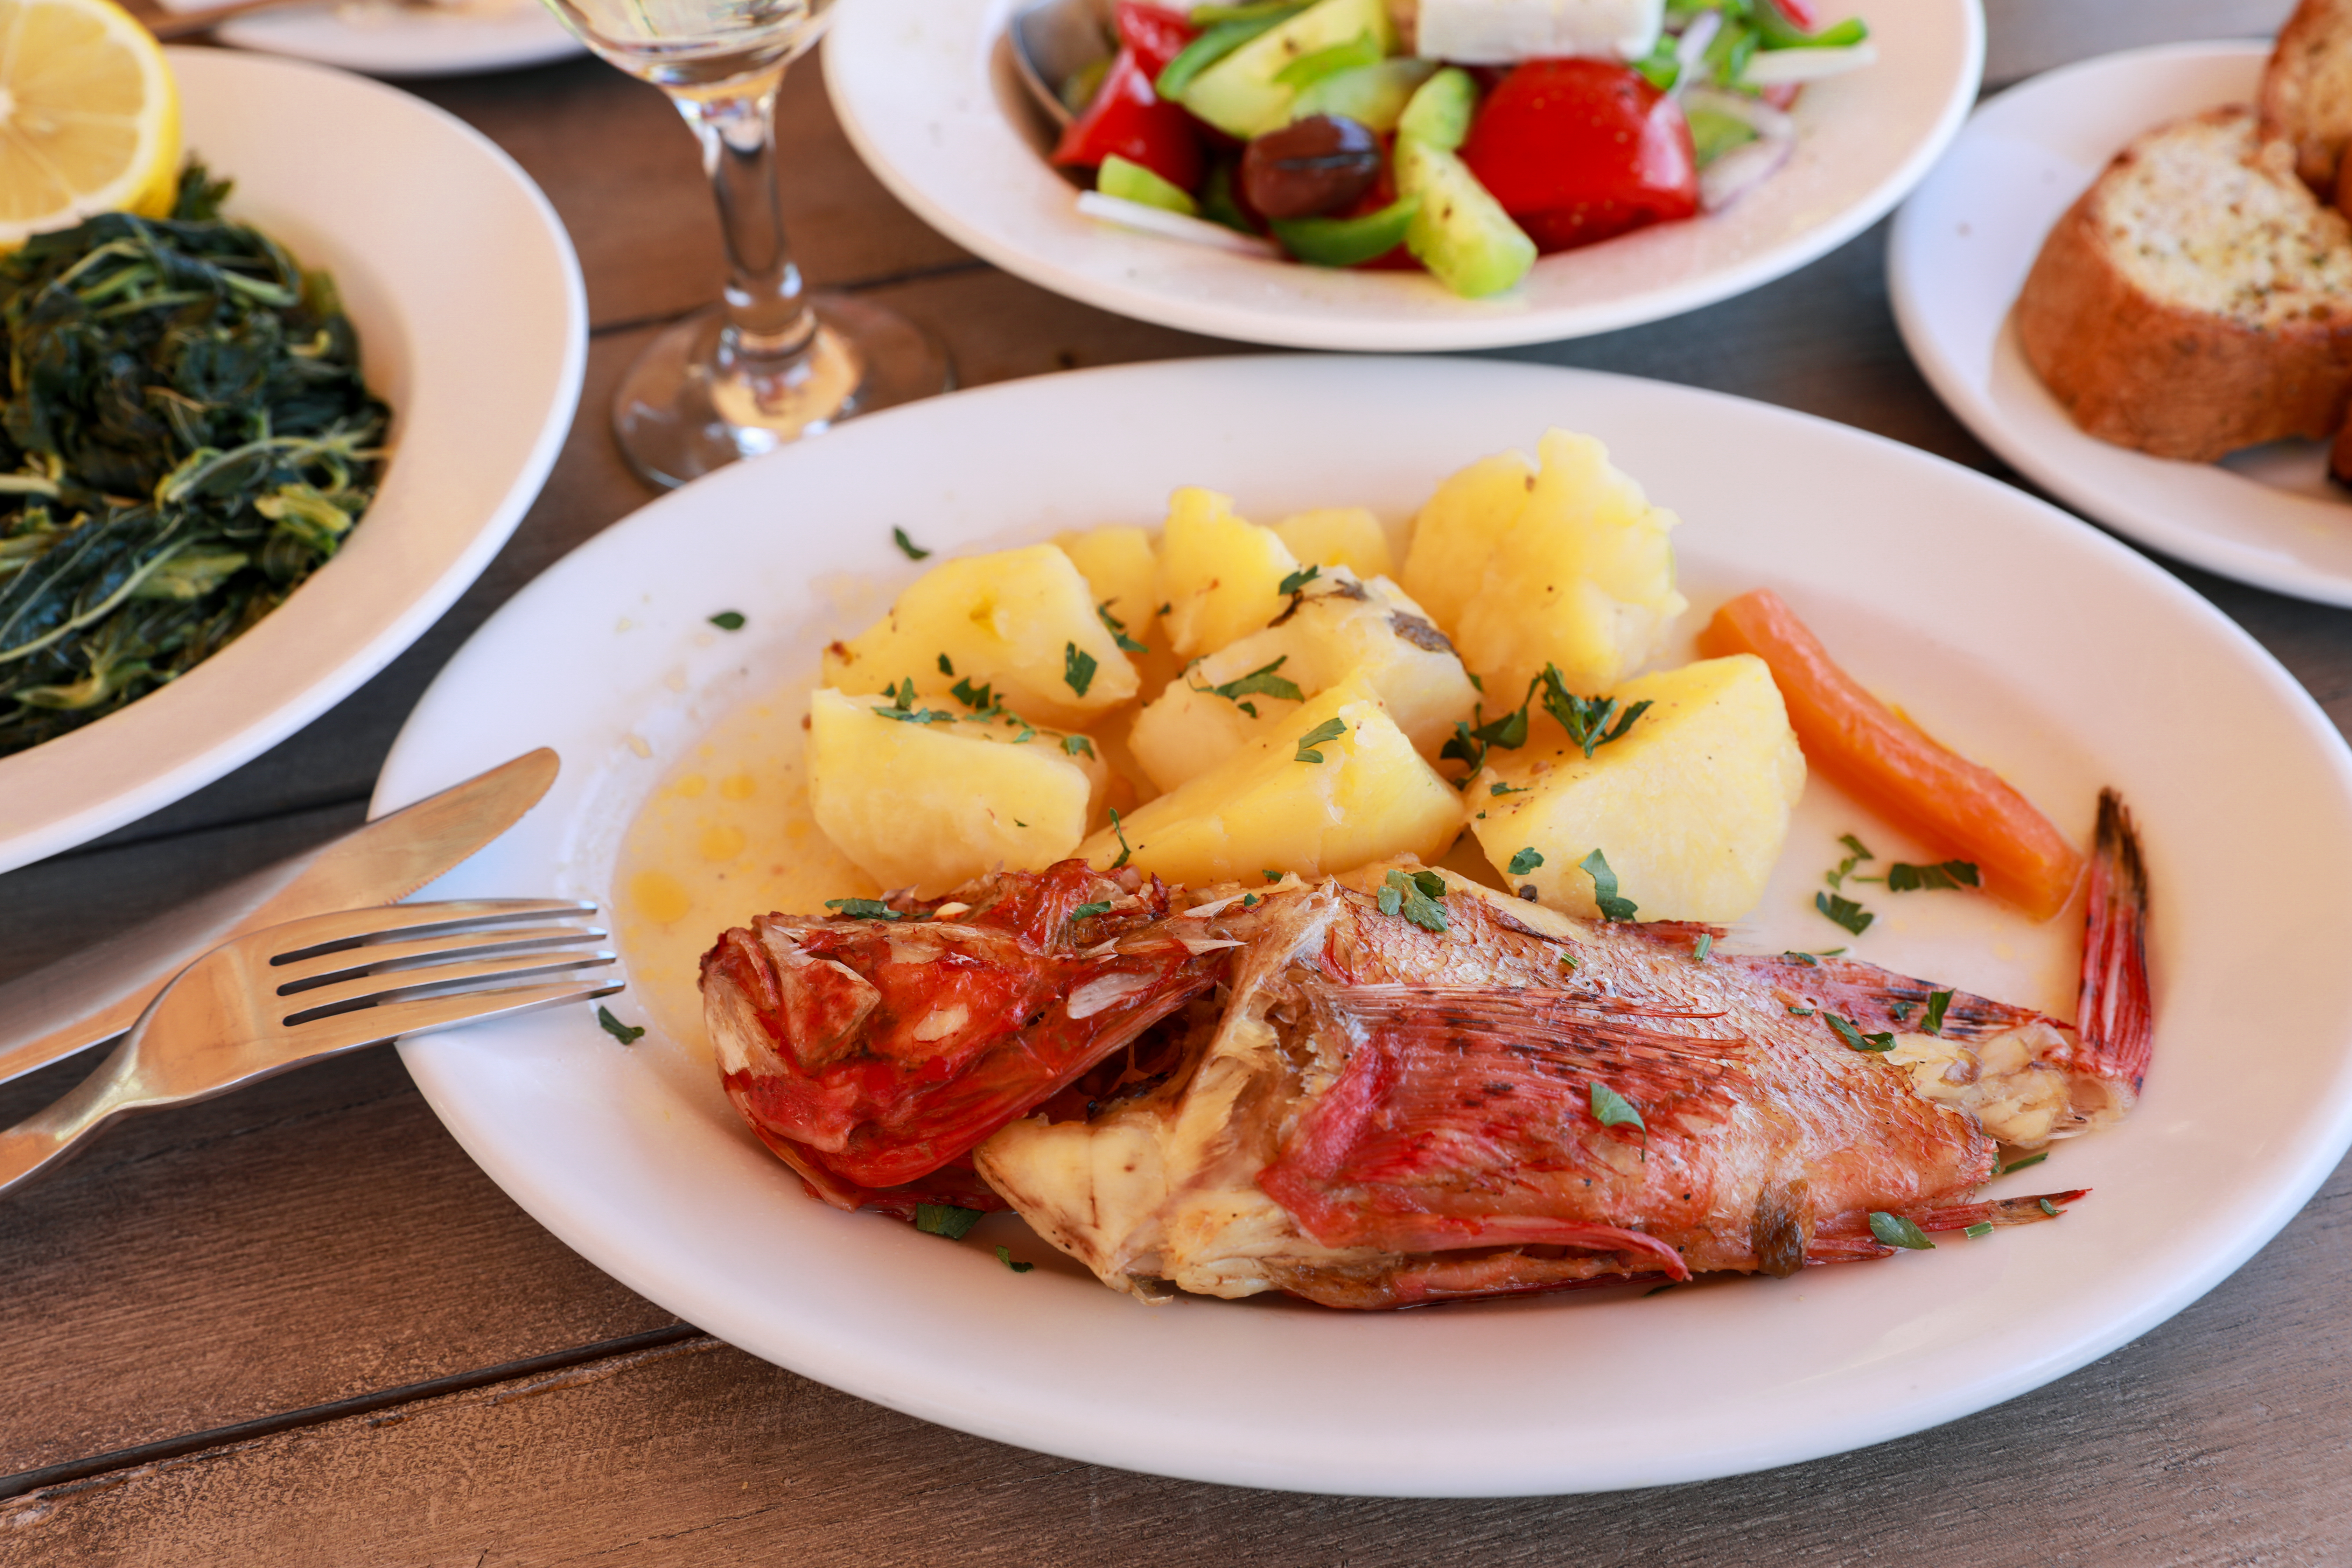 red scorpionfish with potatoes and plates of vegetables and bread 